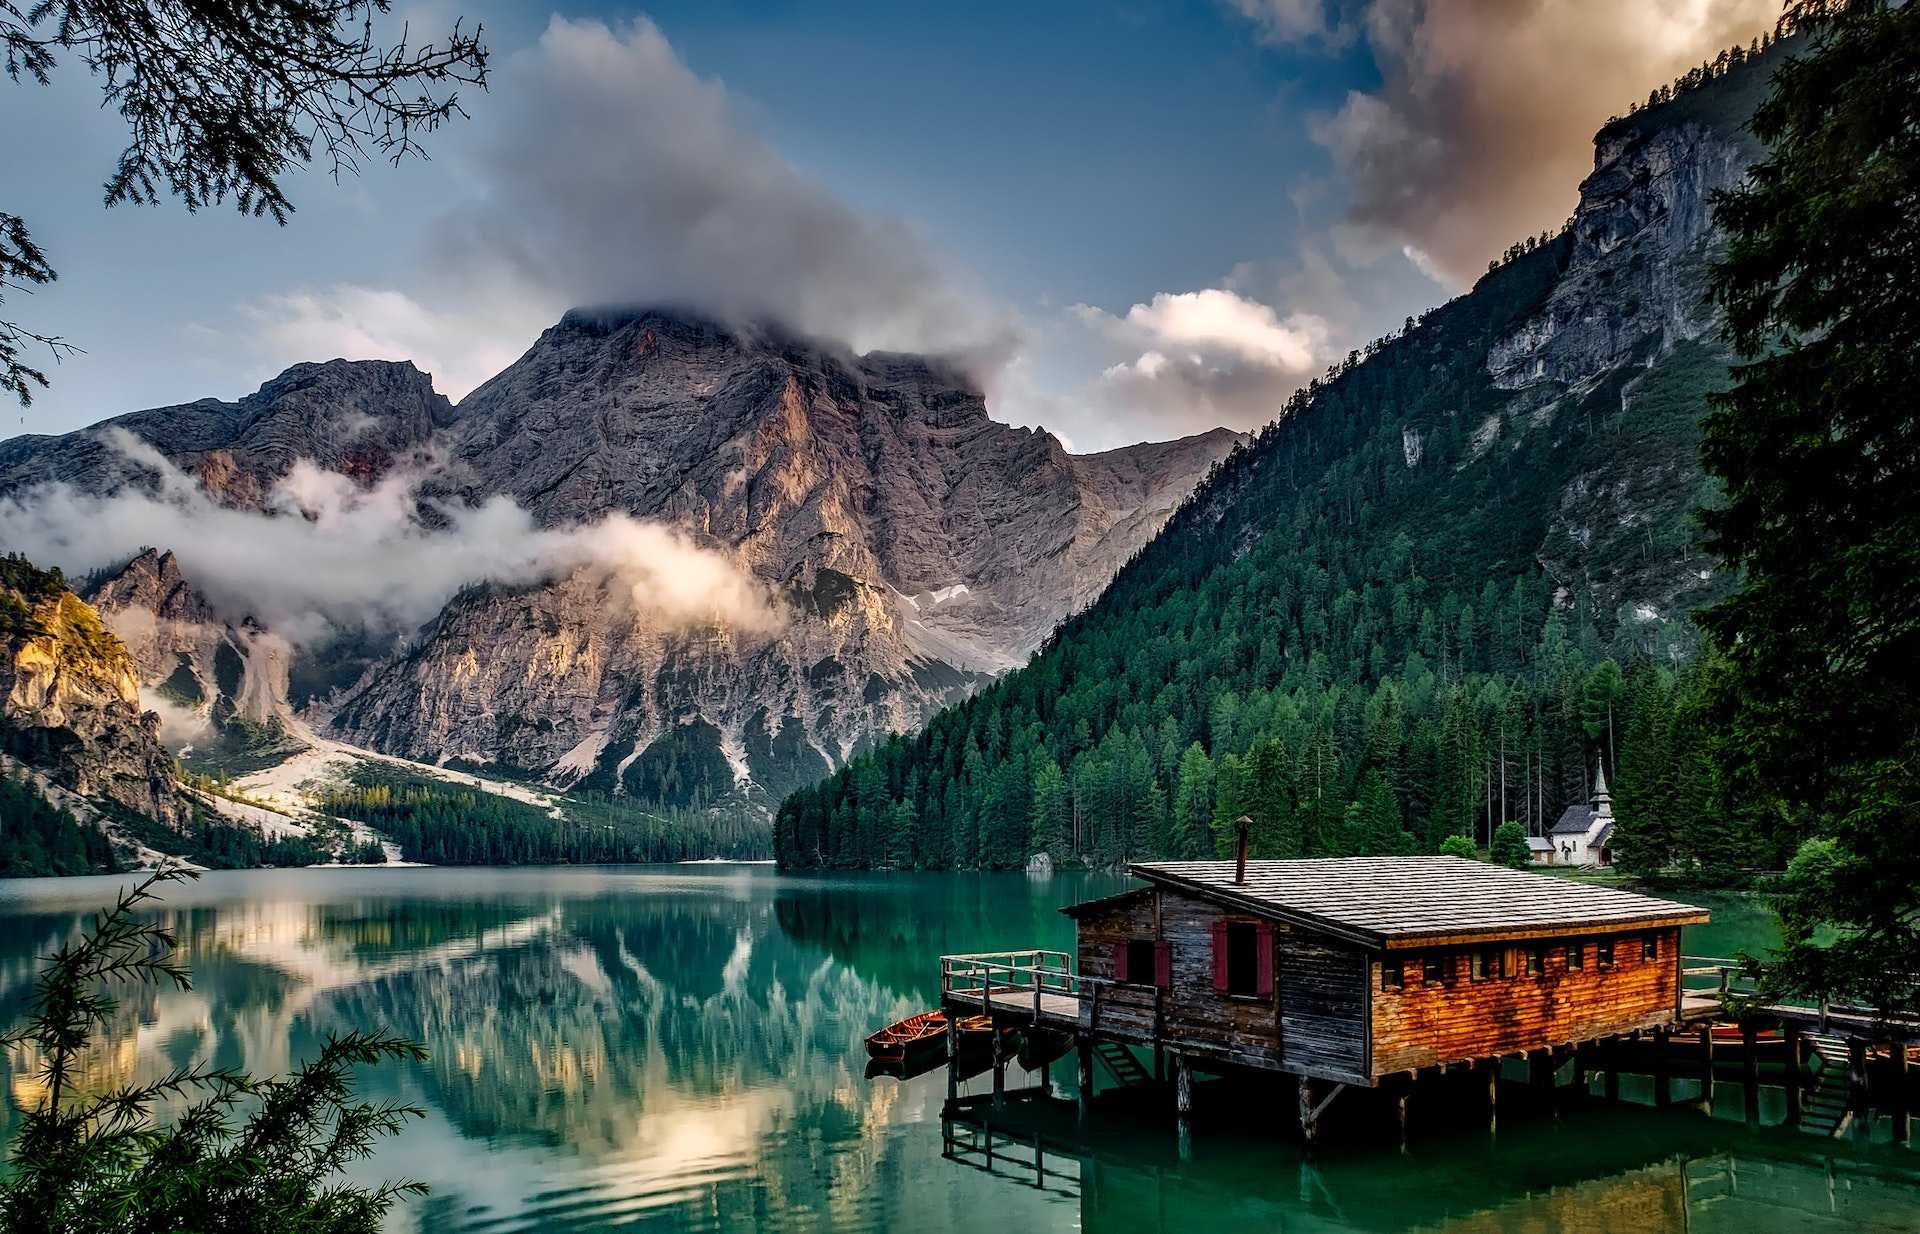 Mirror lake refelcting wooden house in middle of lake overlooking mountain ranges